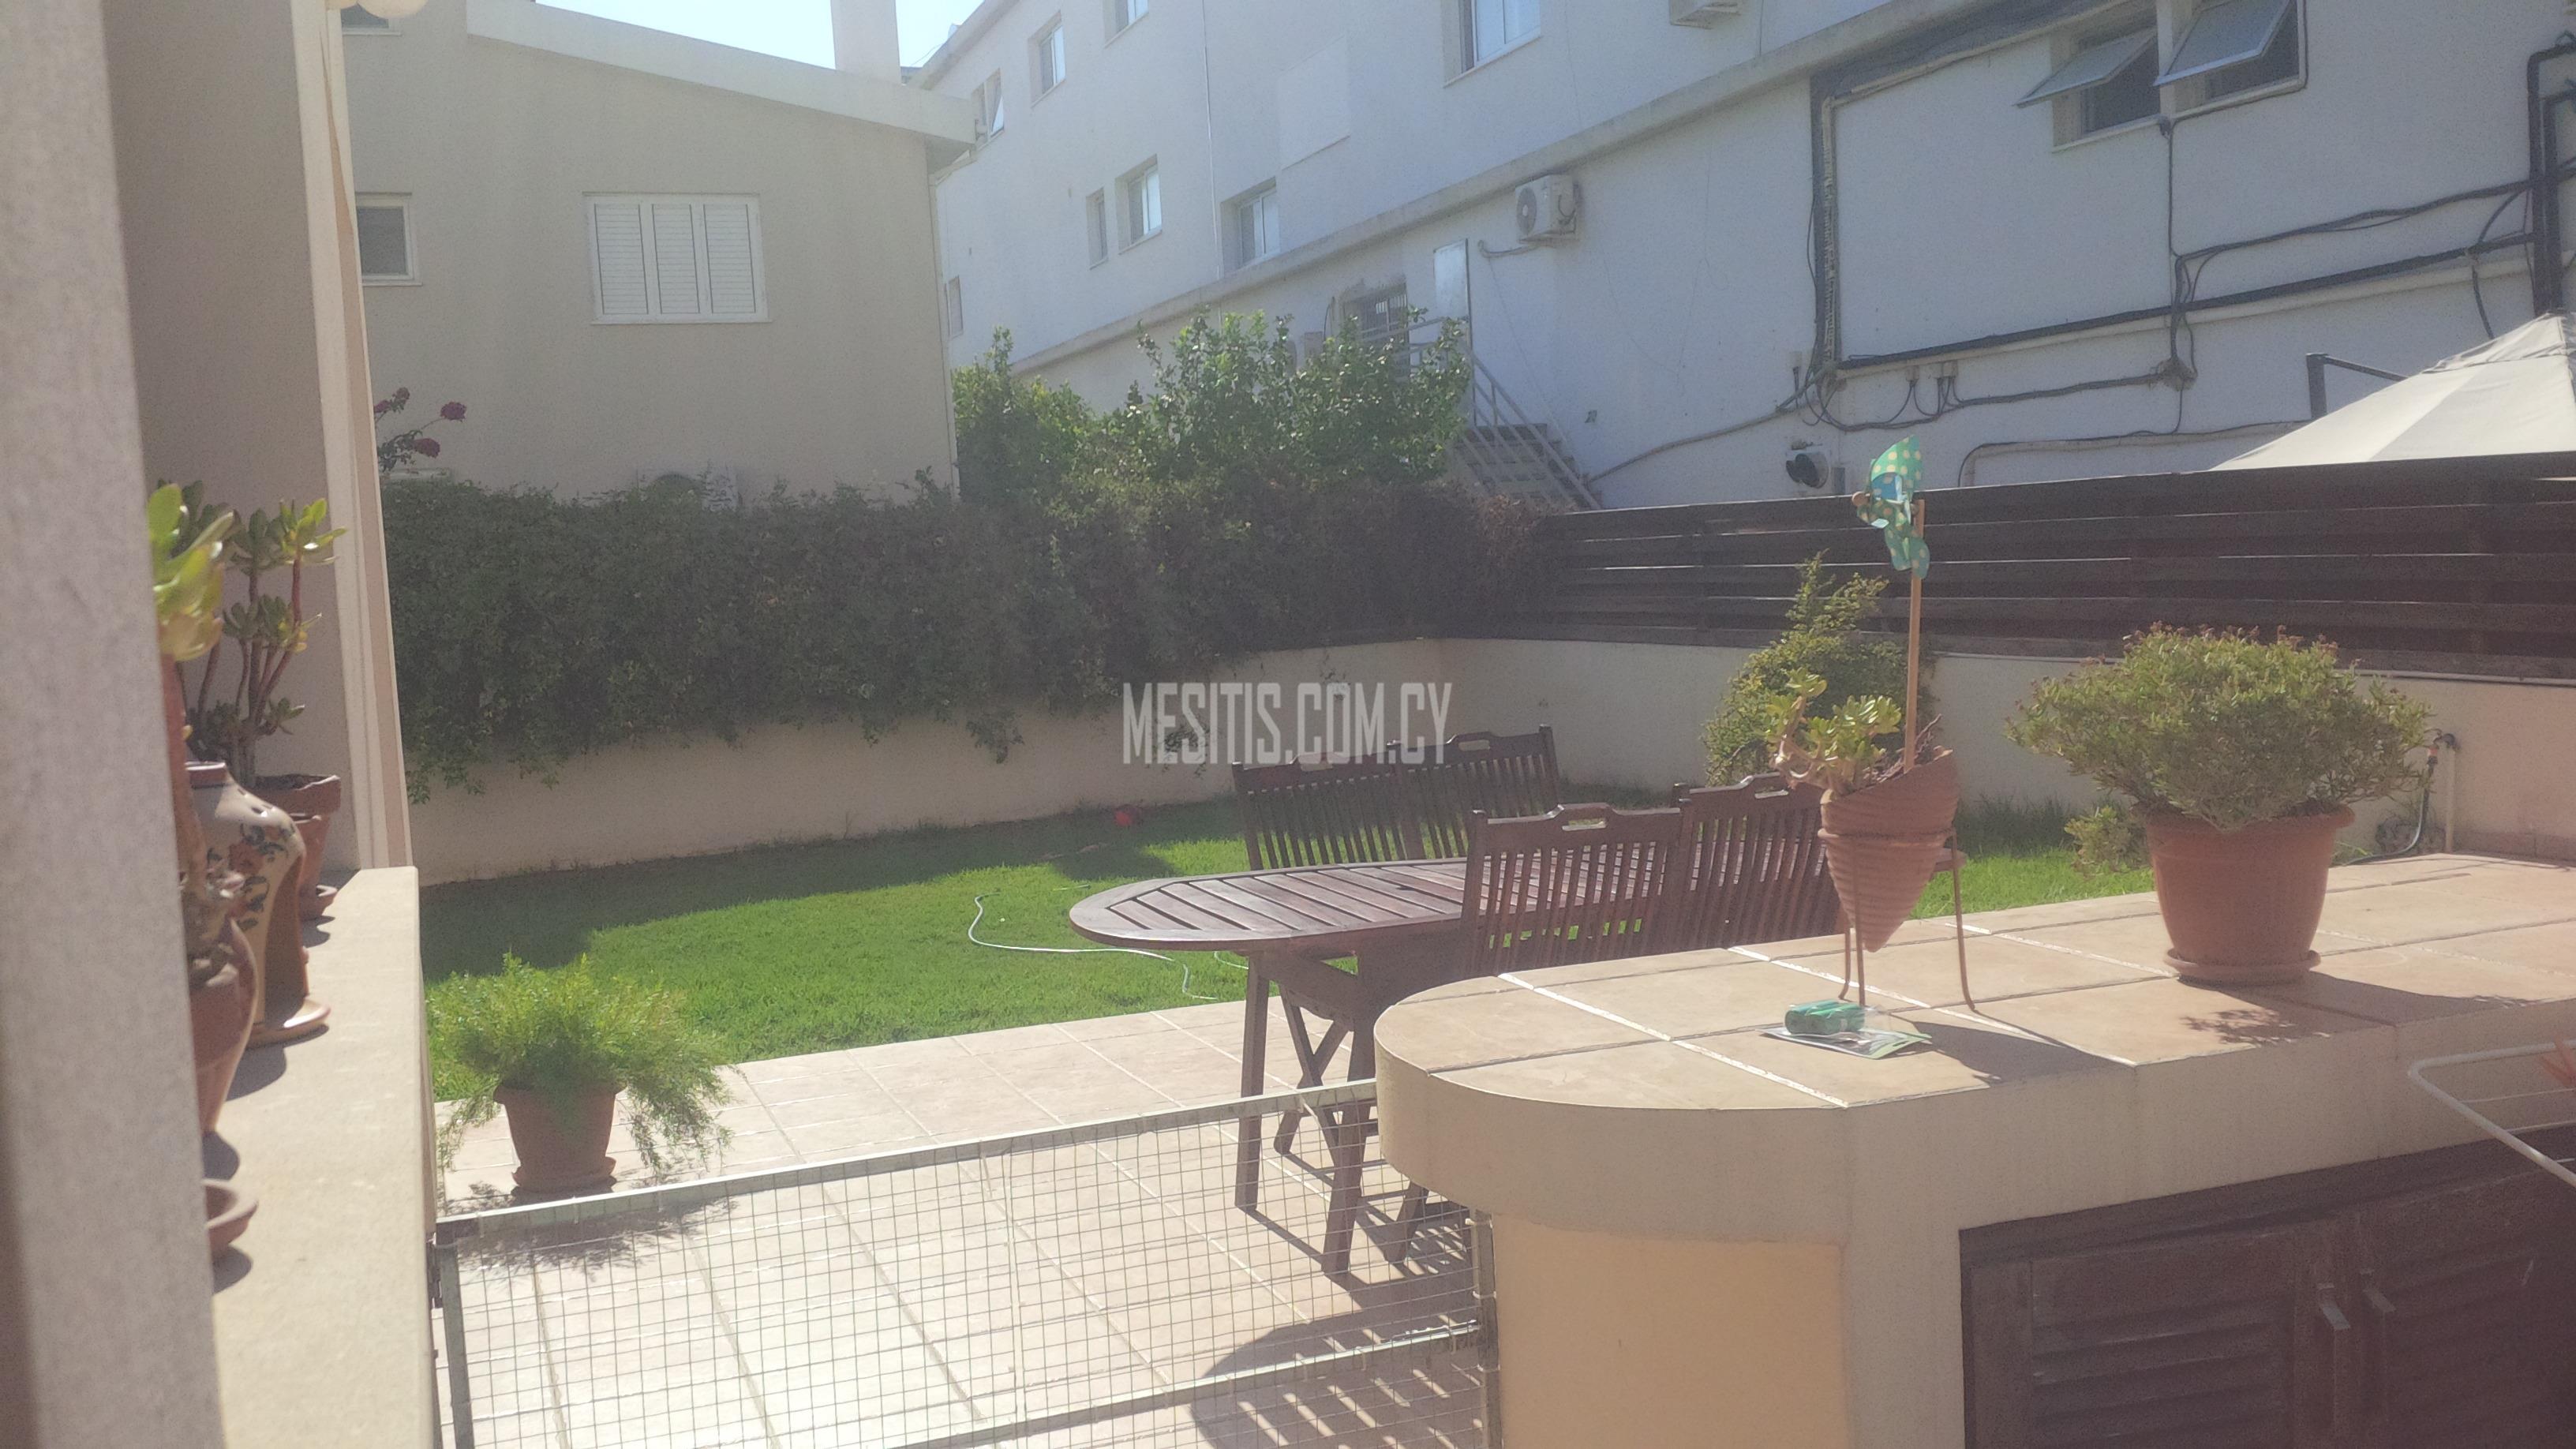 4 Bedroom Luxury House For Rent Or For Sale In Aglantzia With Attic Separate Office Room And Big Yard #1378-8